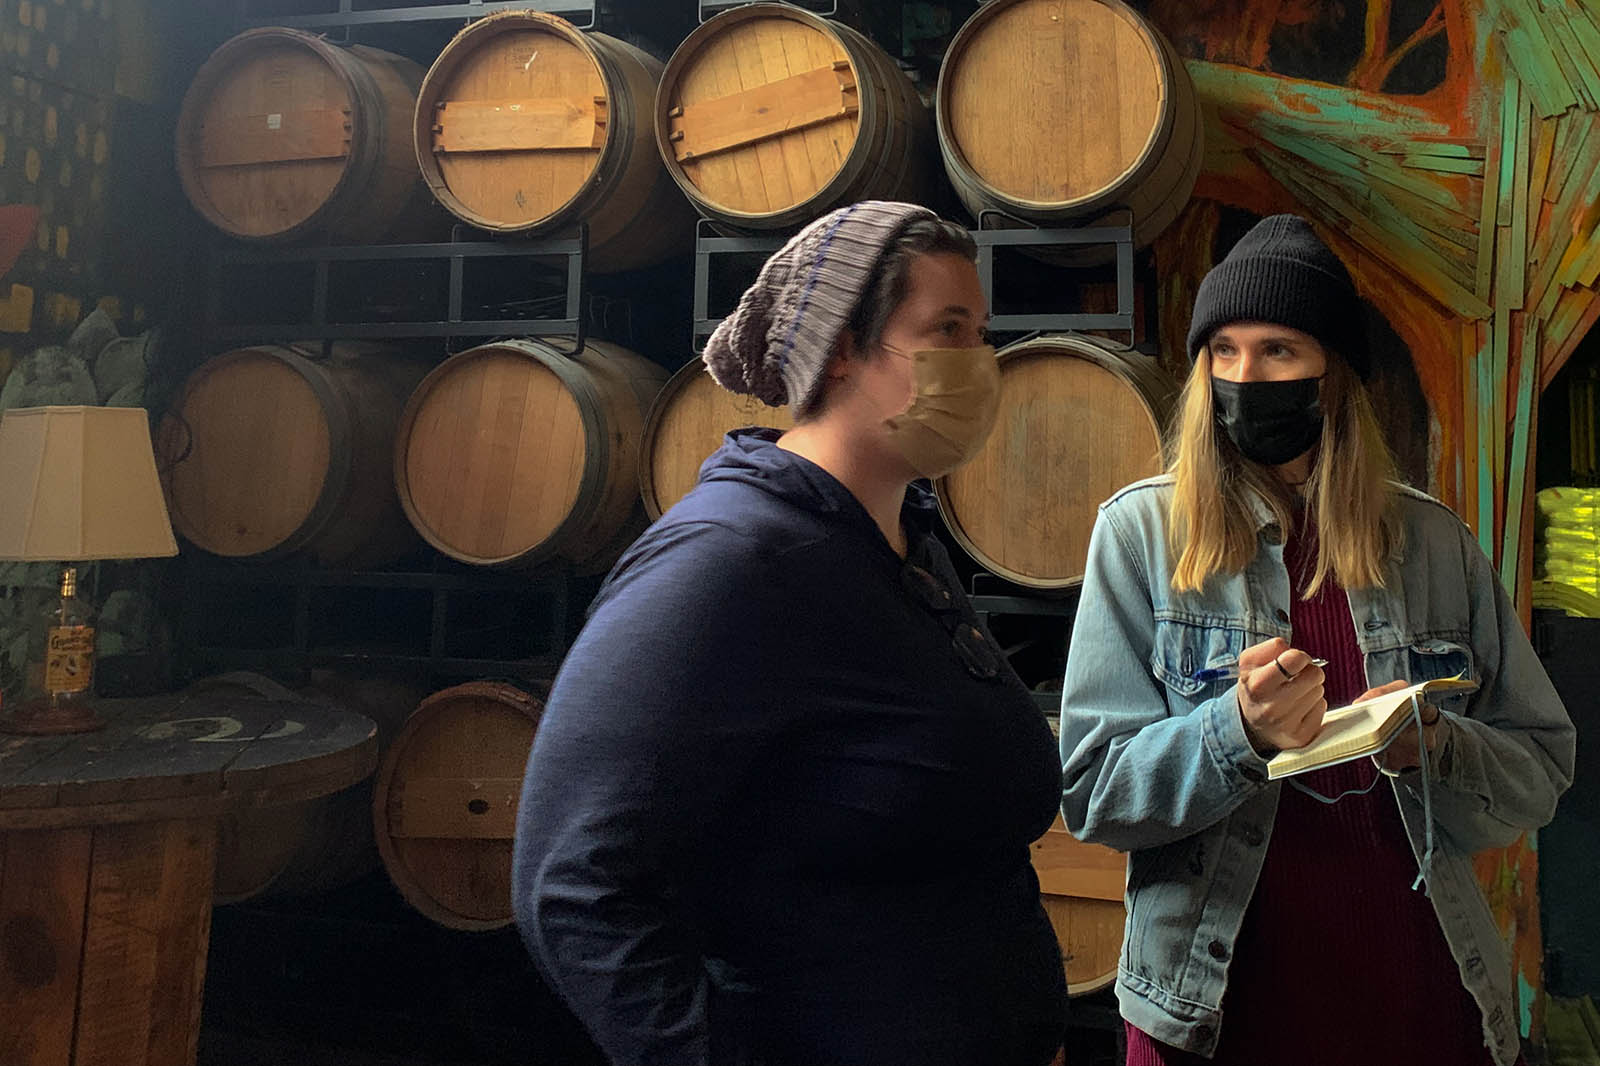 Photo of two people wearing masks, one with a notebook and pen in hand. Behind them there are barrels.